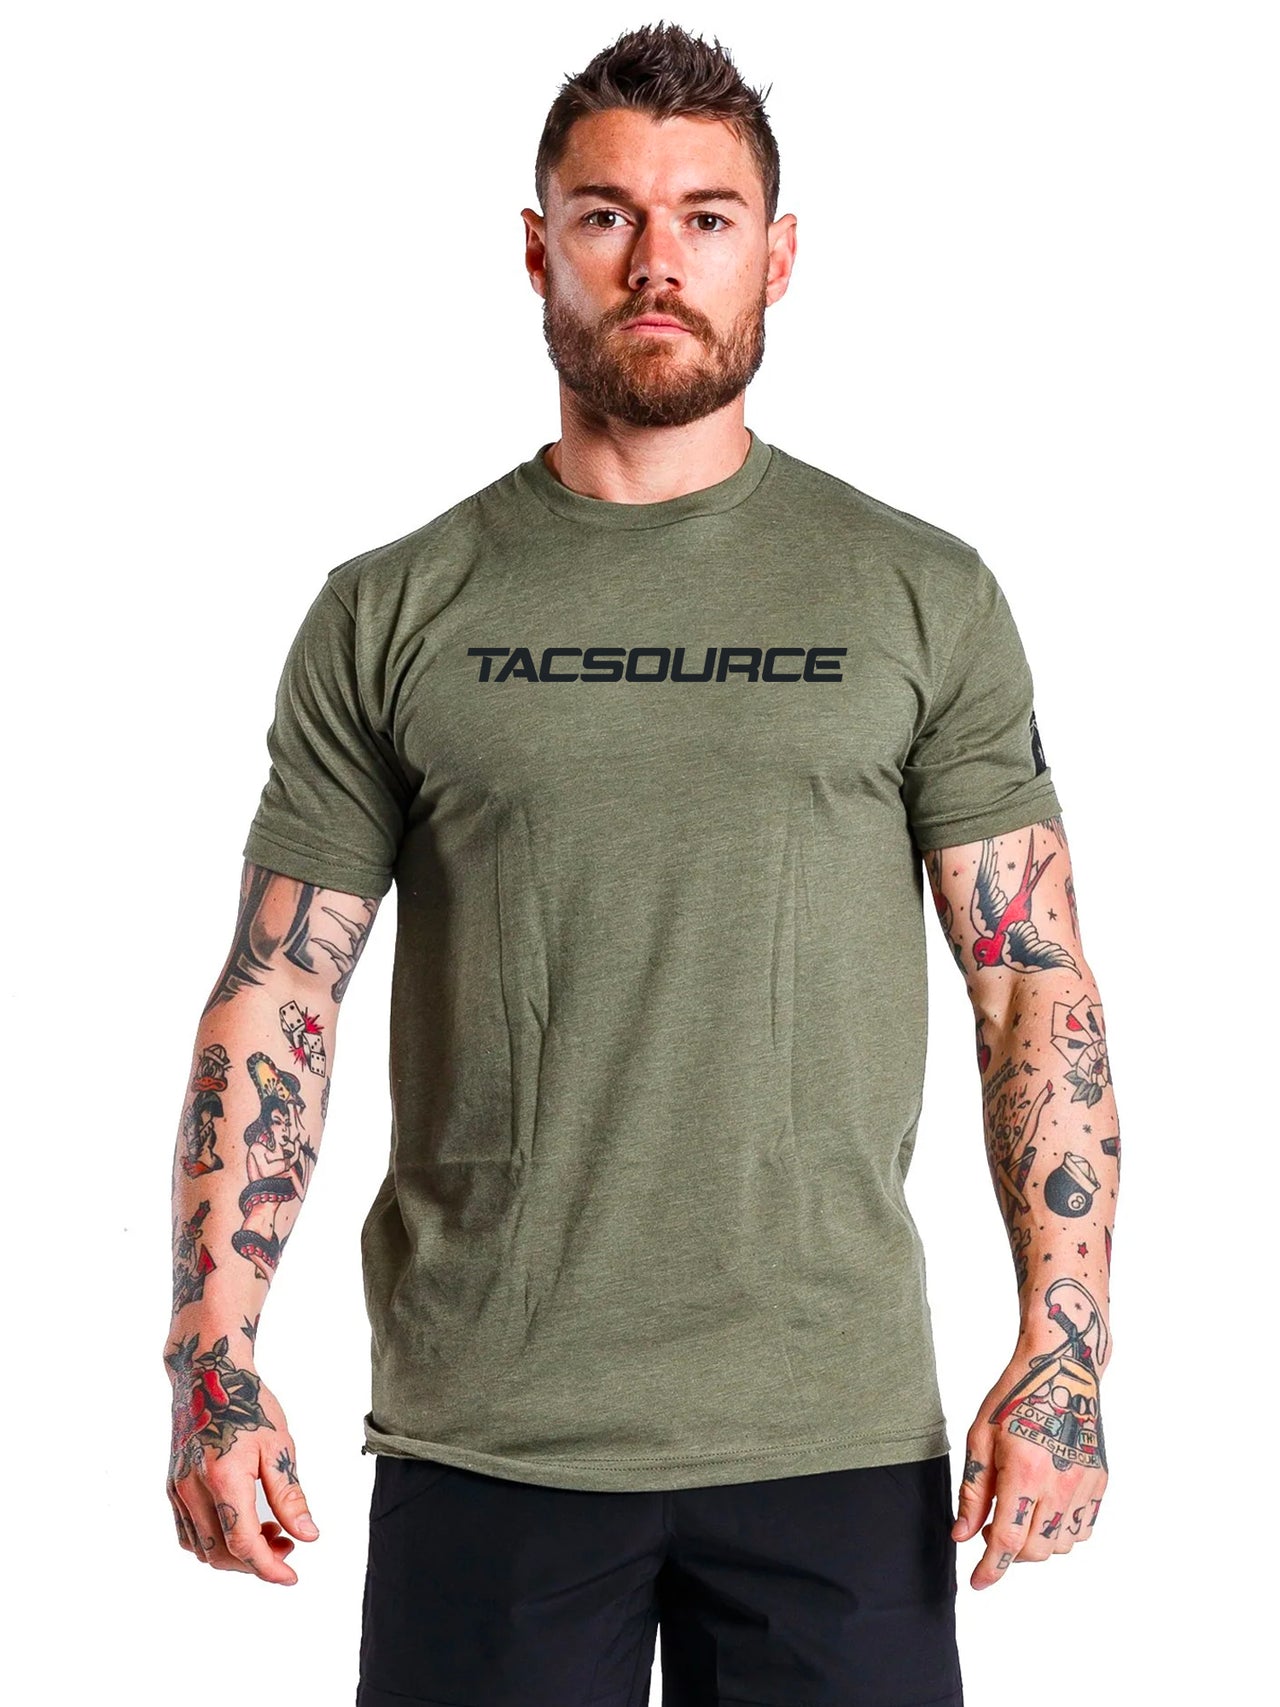 TacSource Subdued Olive Tee - AUS Flag